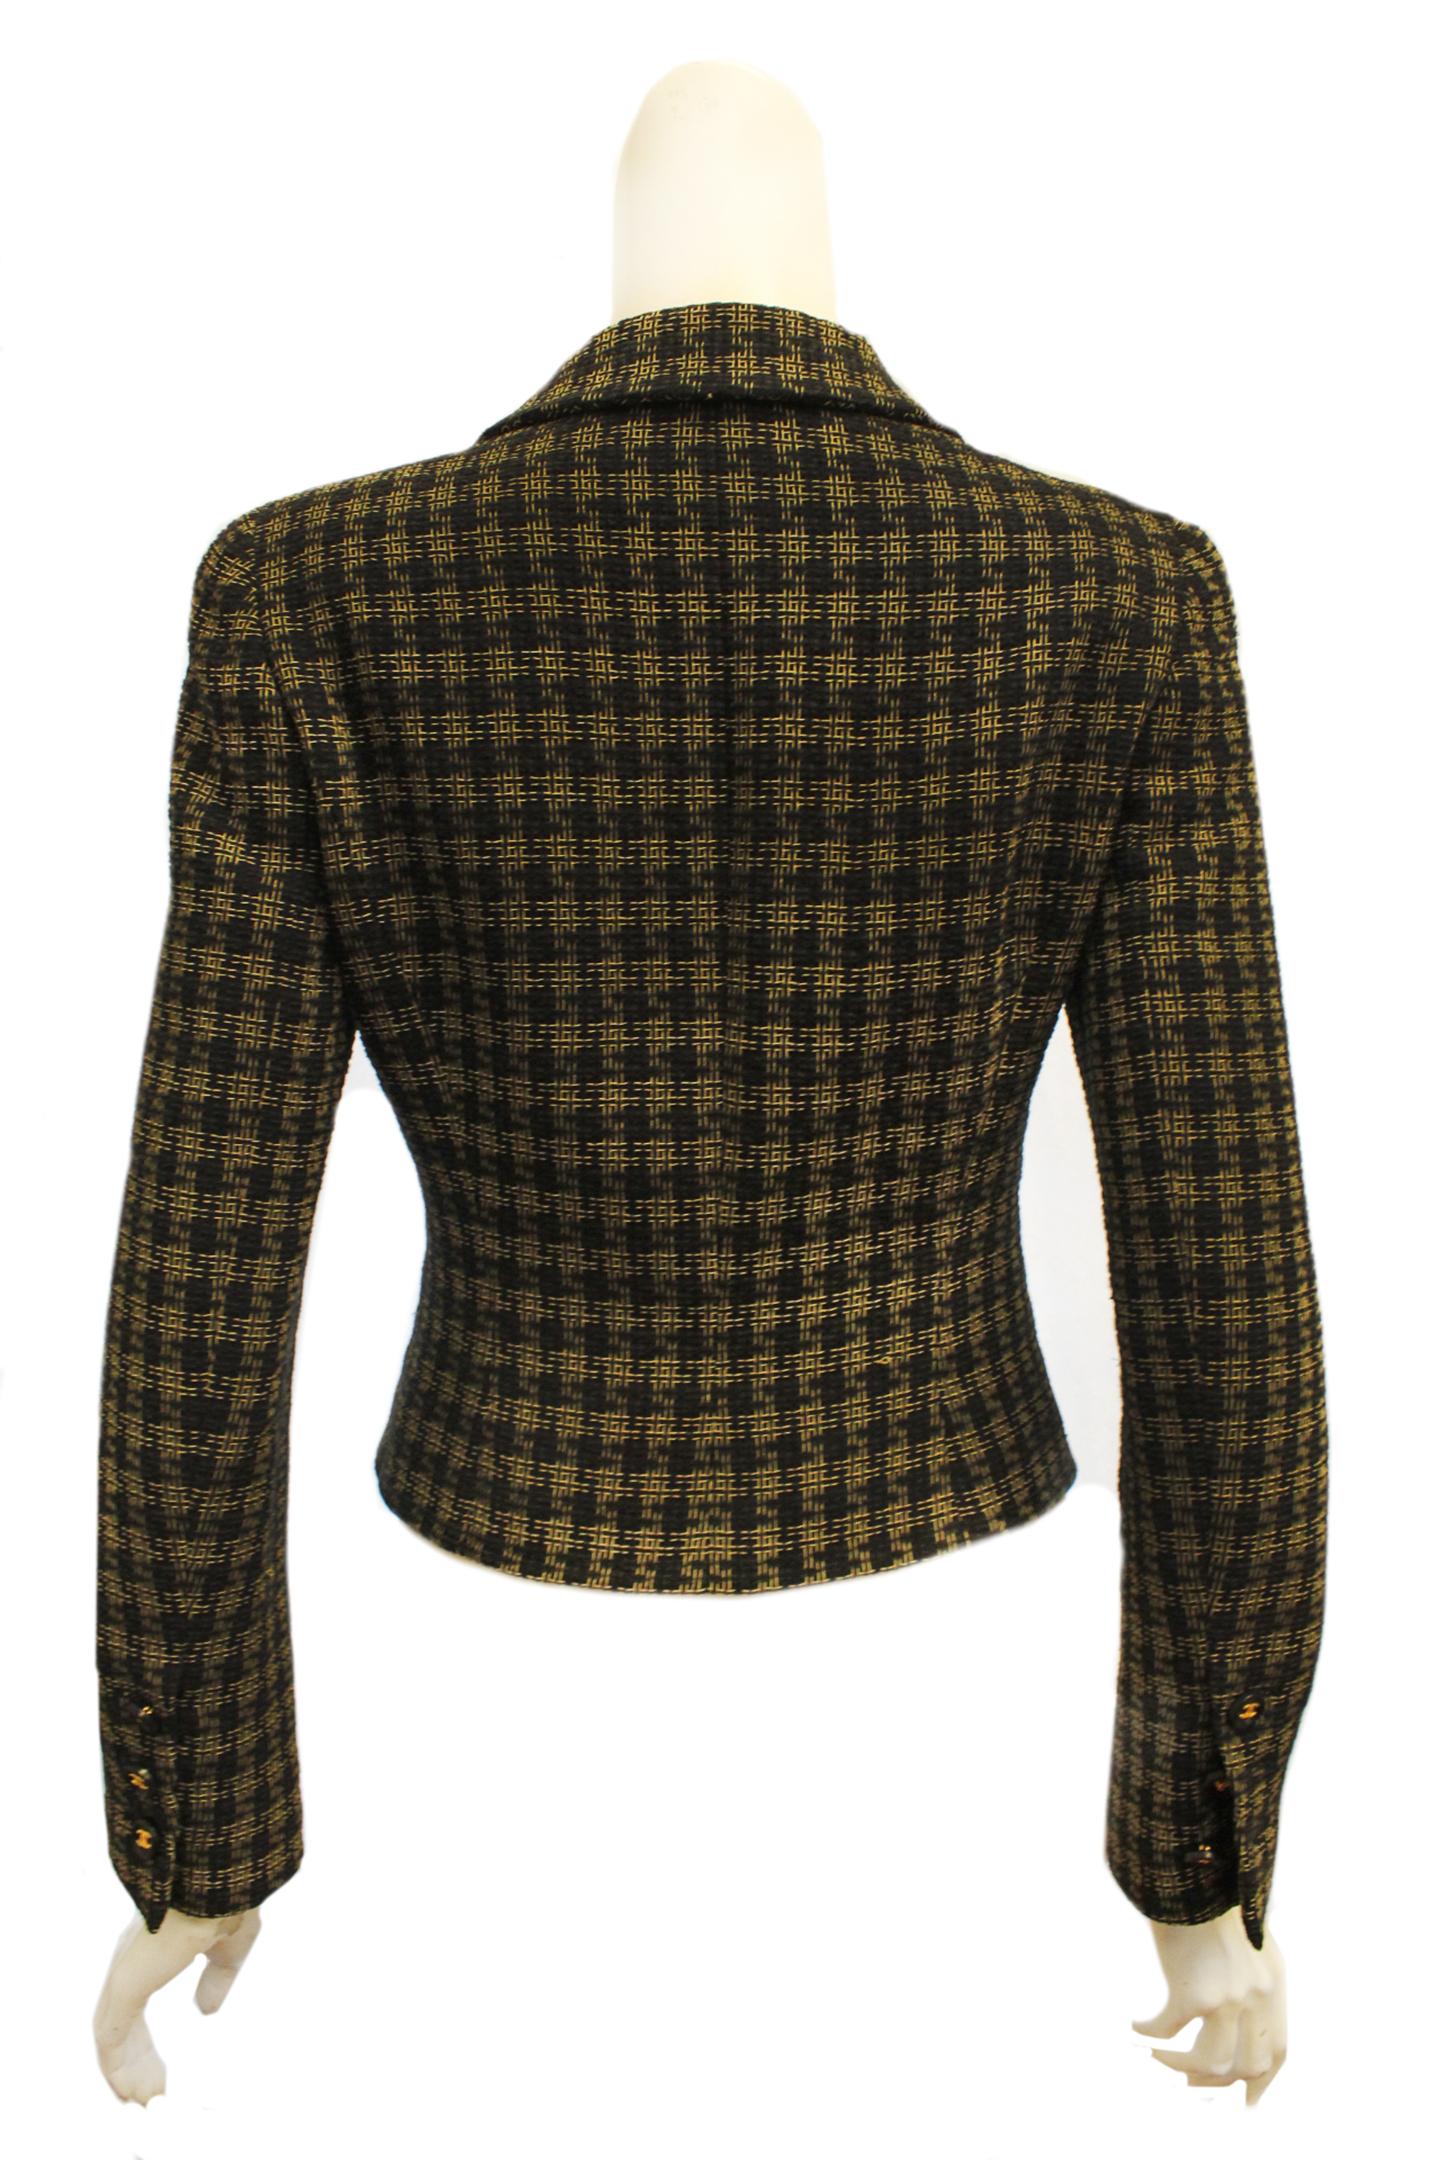 Women's Chanel Black and Gold Tone Check Cropped Jacket